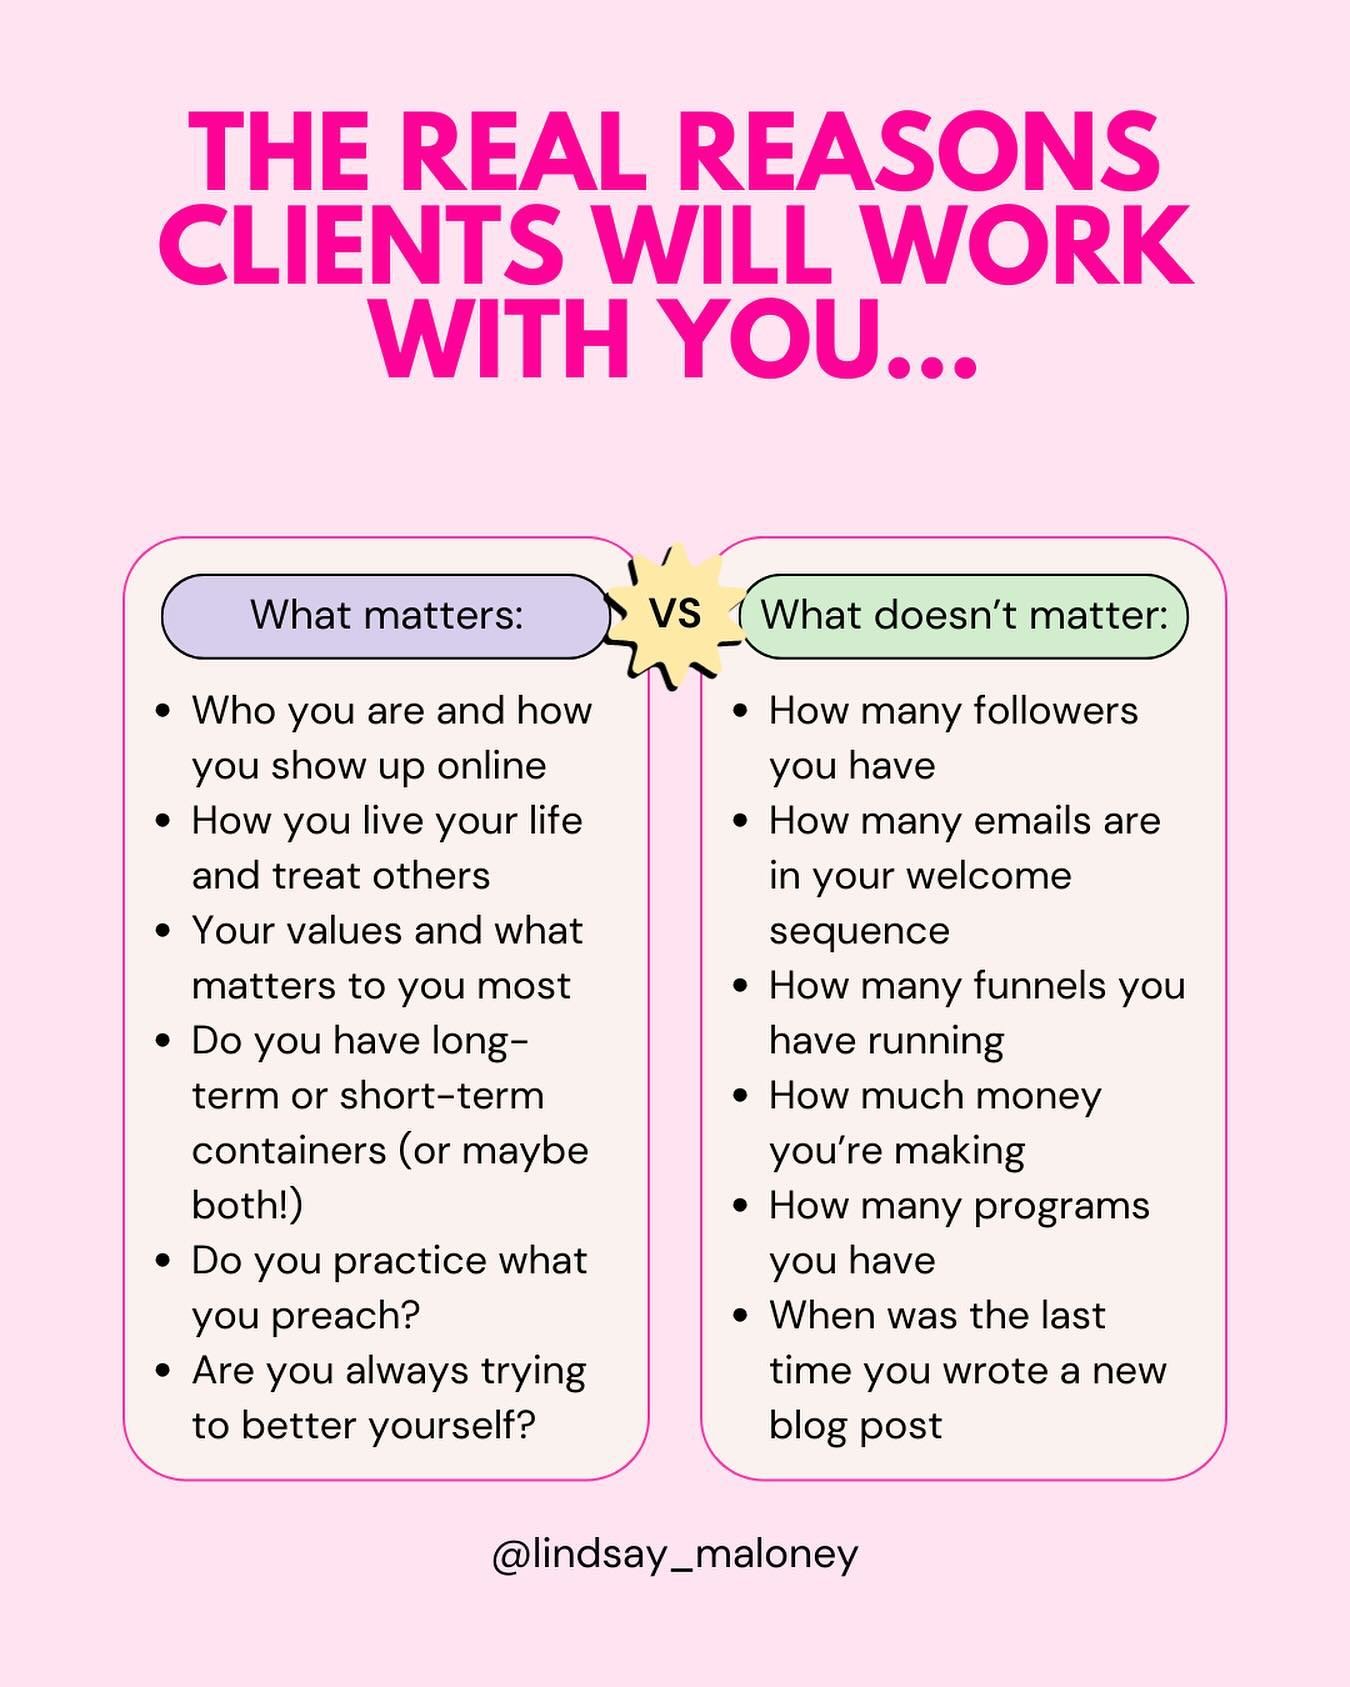 📣 The REAL reasons clients will work with you.

Where are you putting most of your effort towards?

What matters:
* Who you are and how you show up online
* How you live your life and treat others
* Your values and what matters to you most
* Do you 